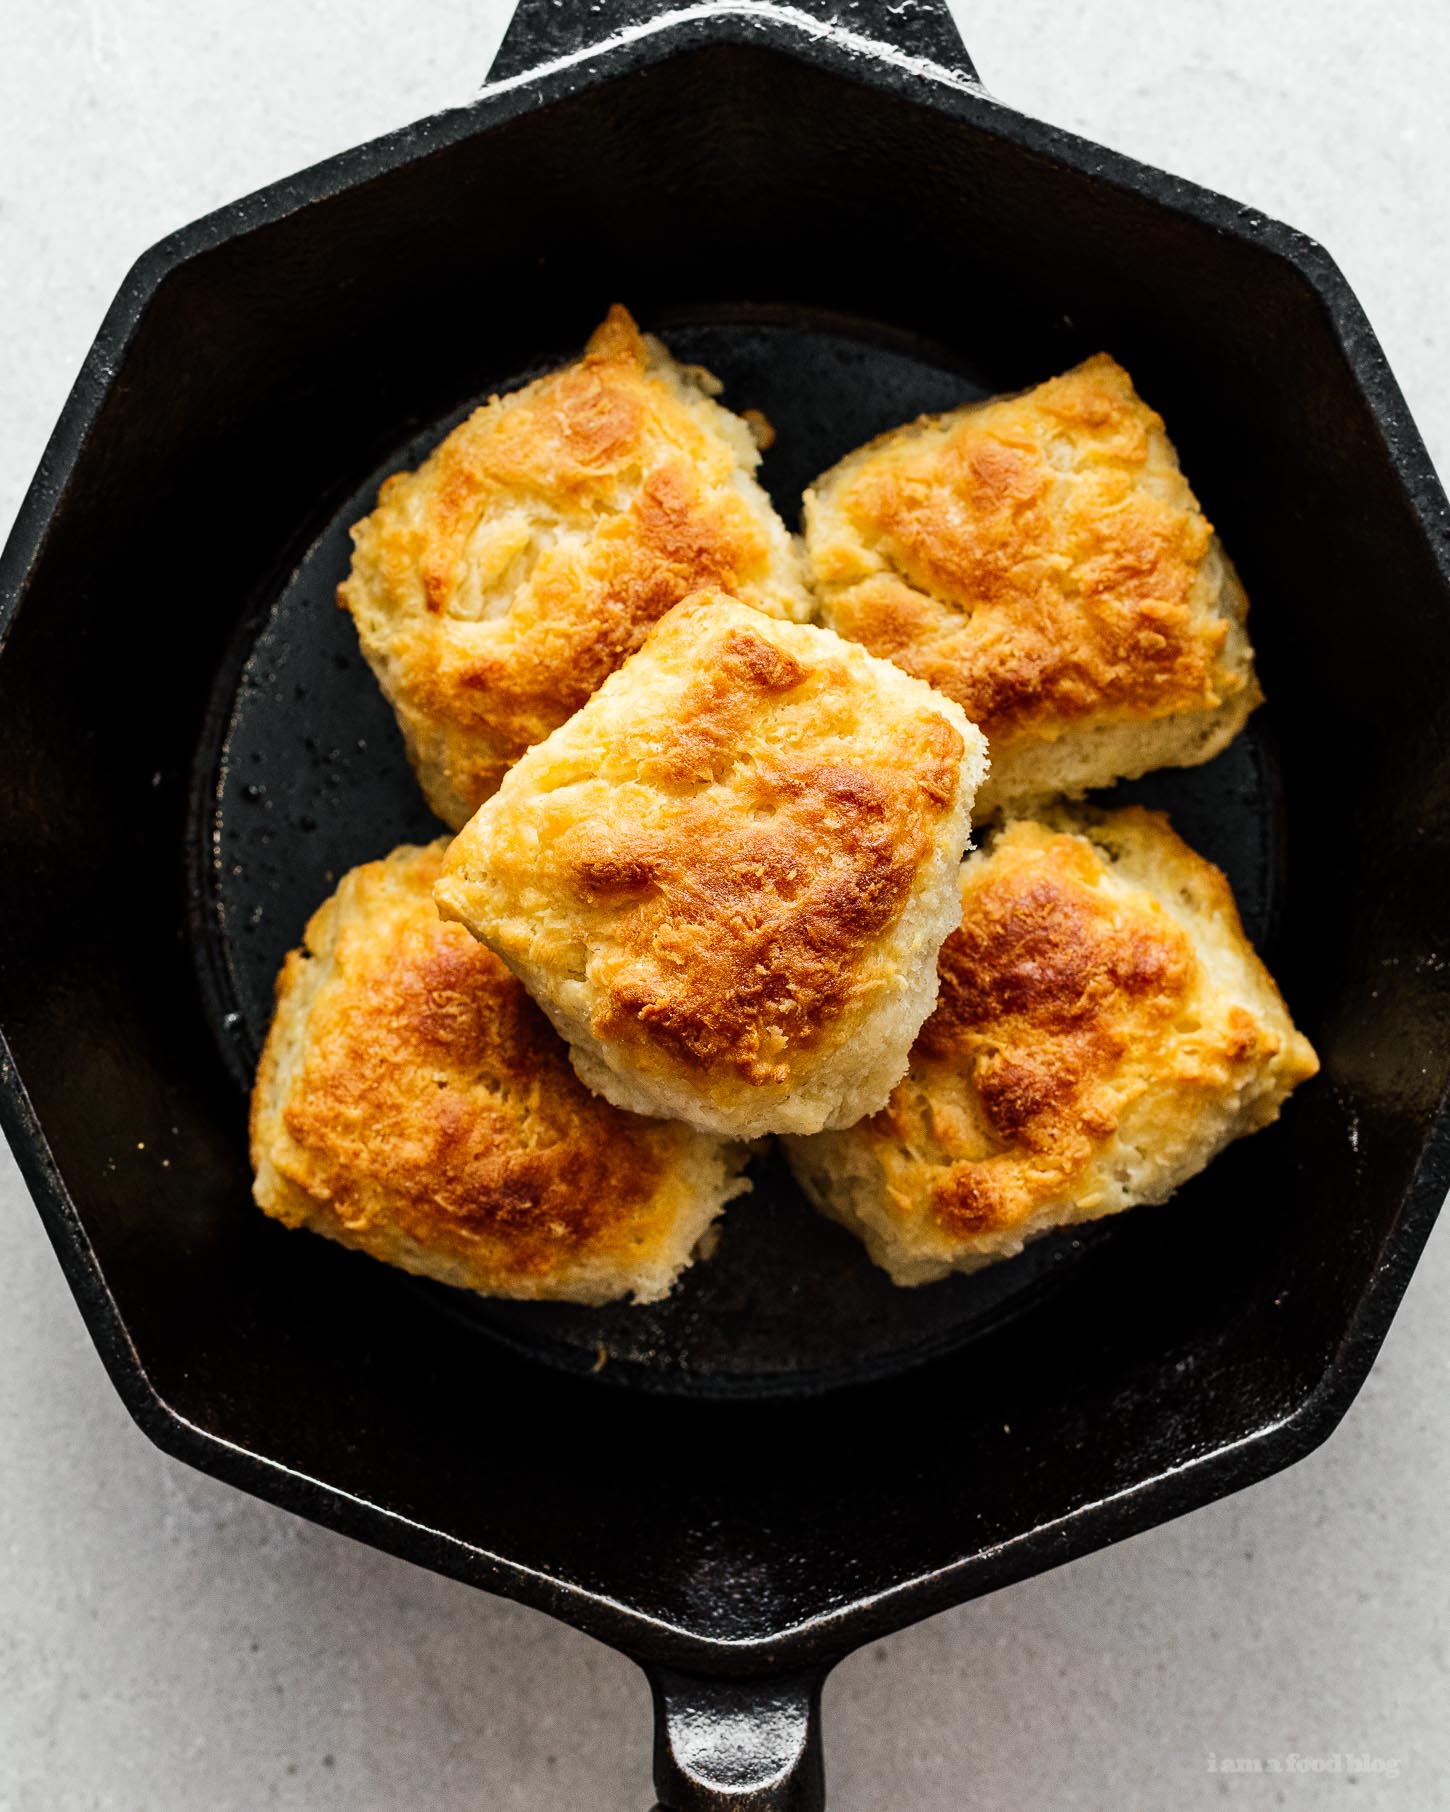 Small Batch Skillet Buttermilk Biscuits | www.iamafoodblog.com